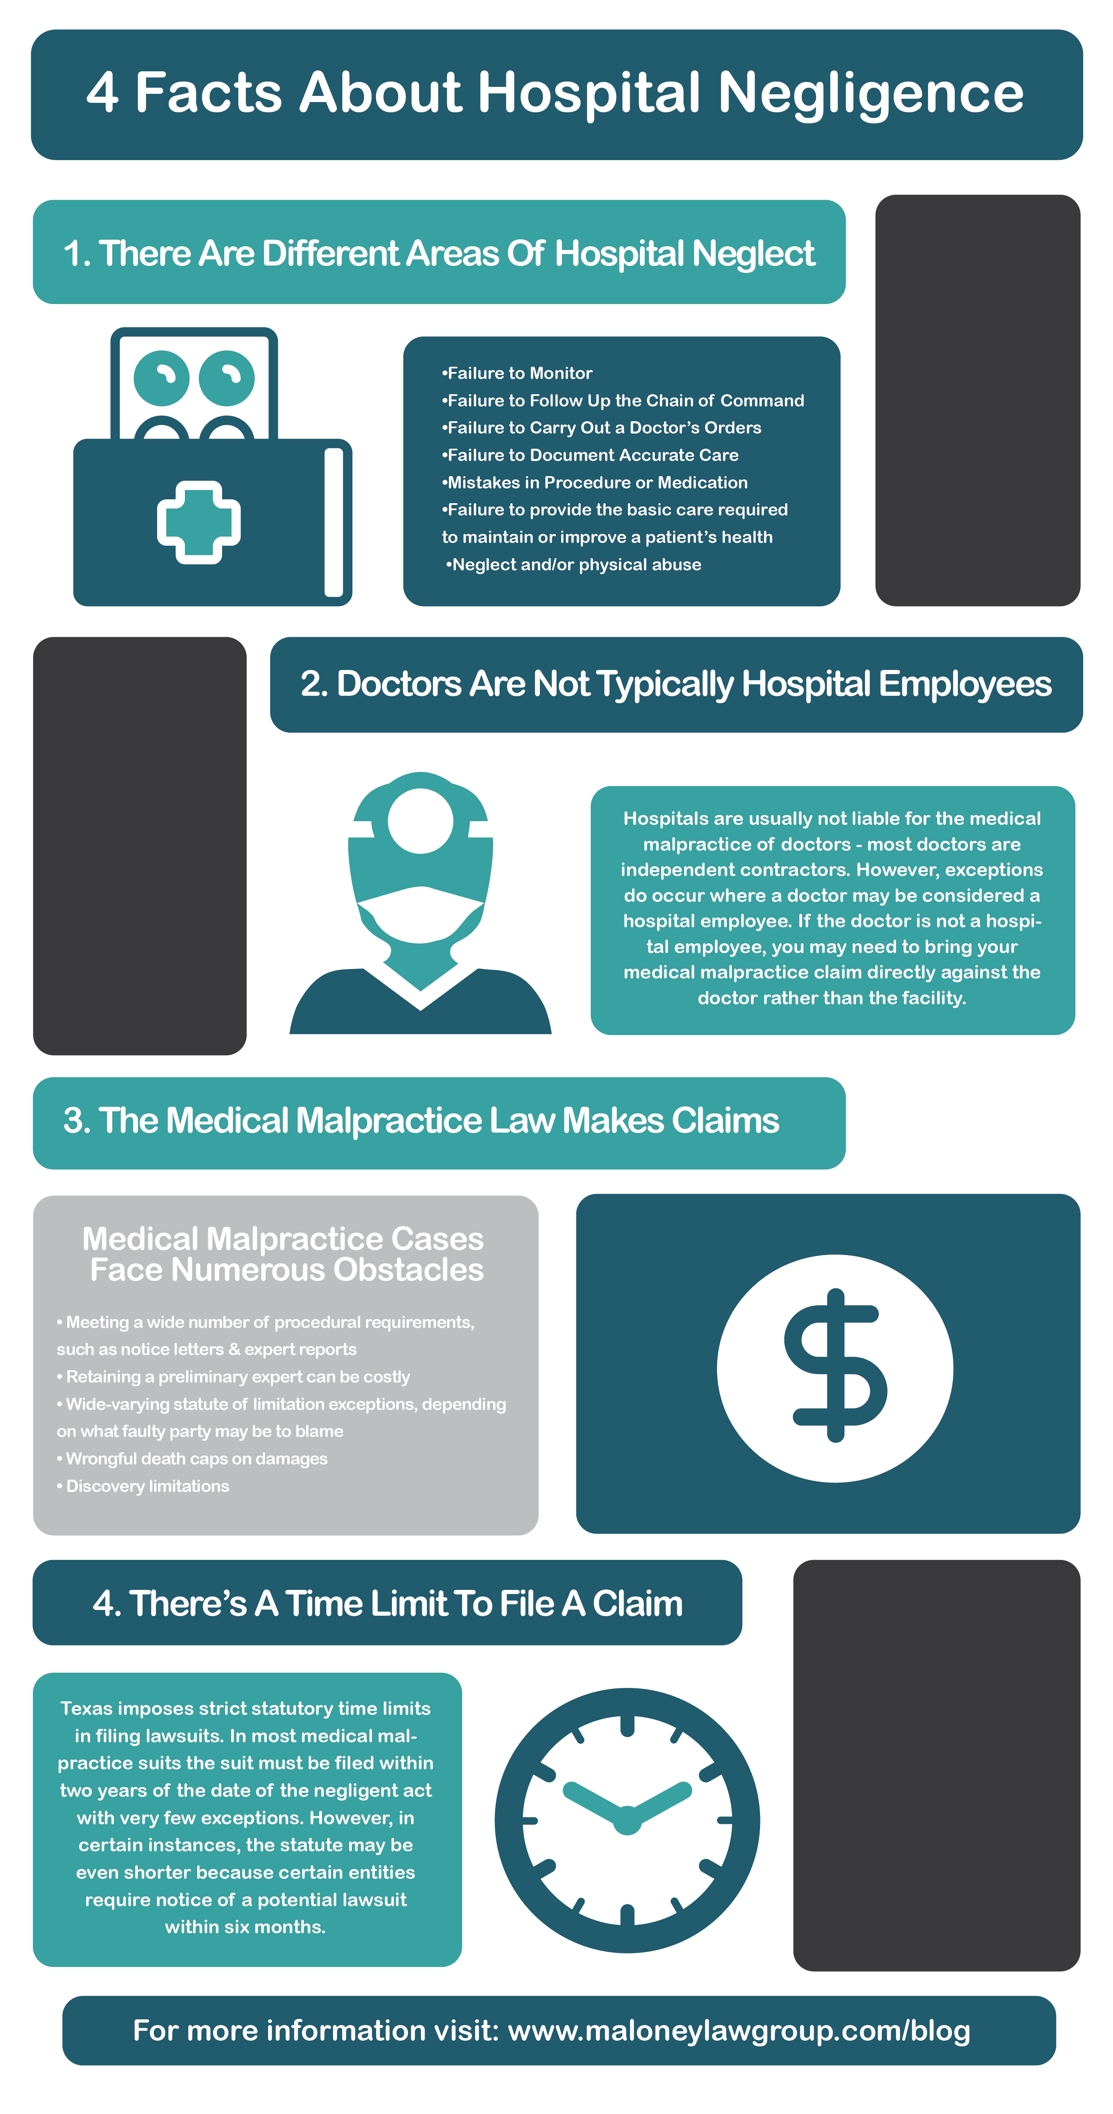 4 Facts About Hospital Negligence